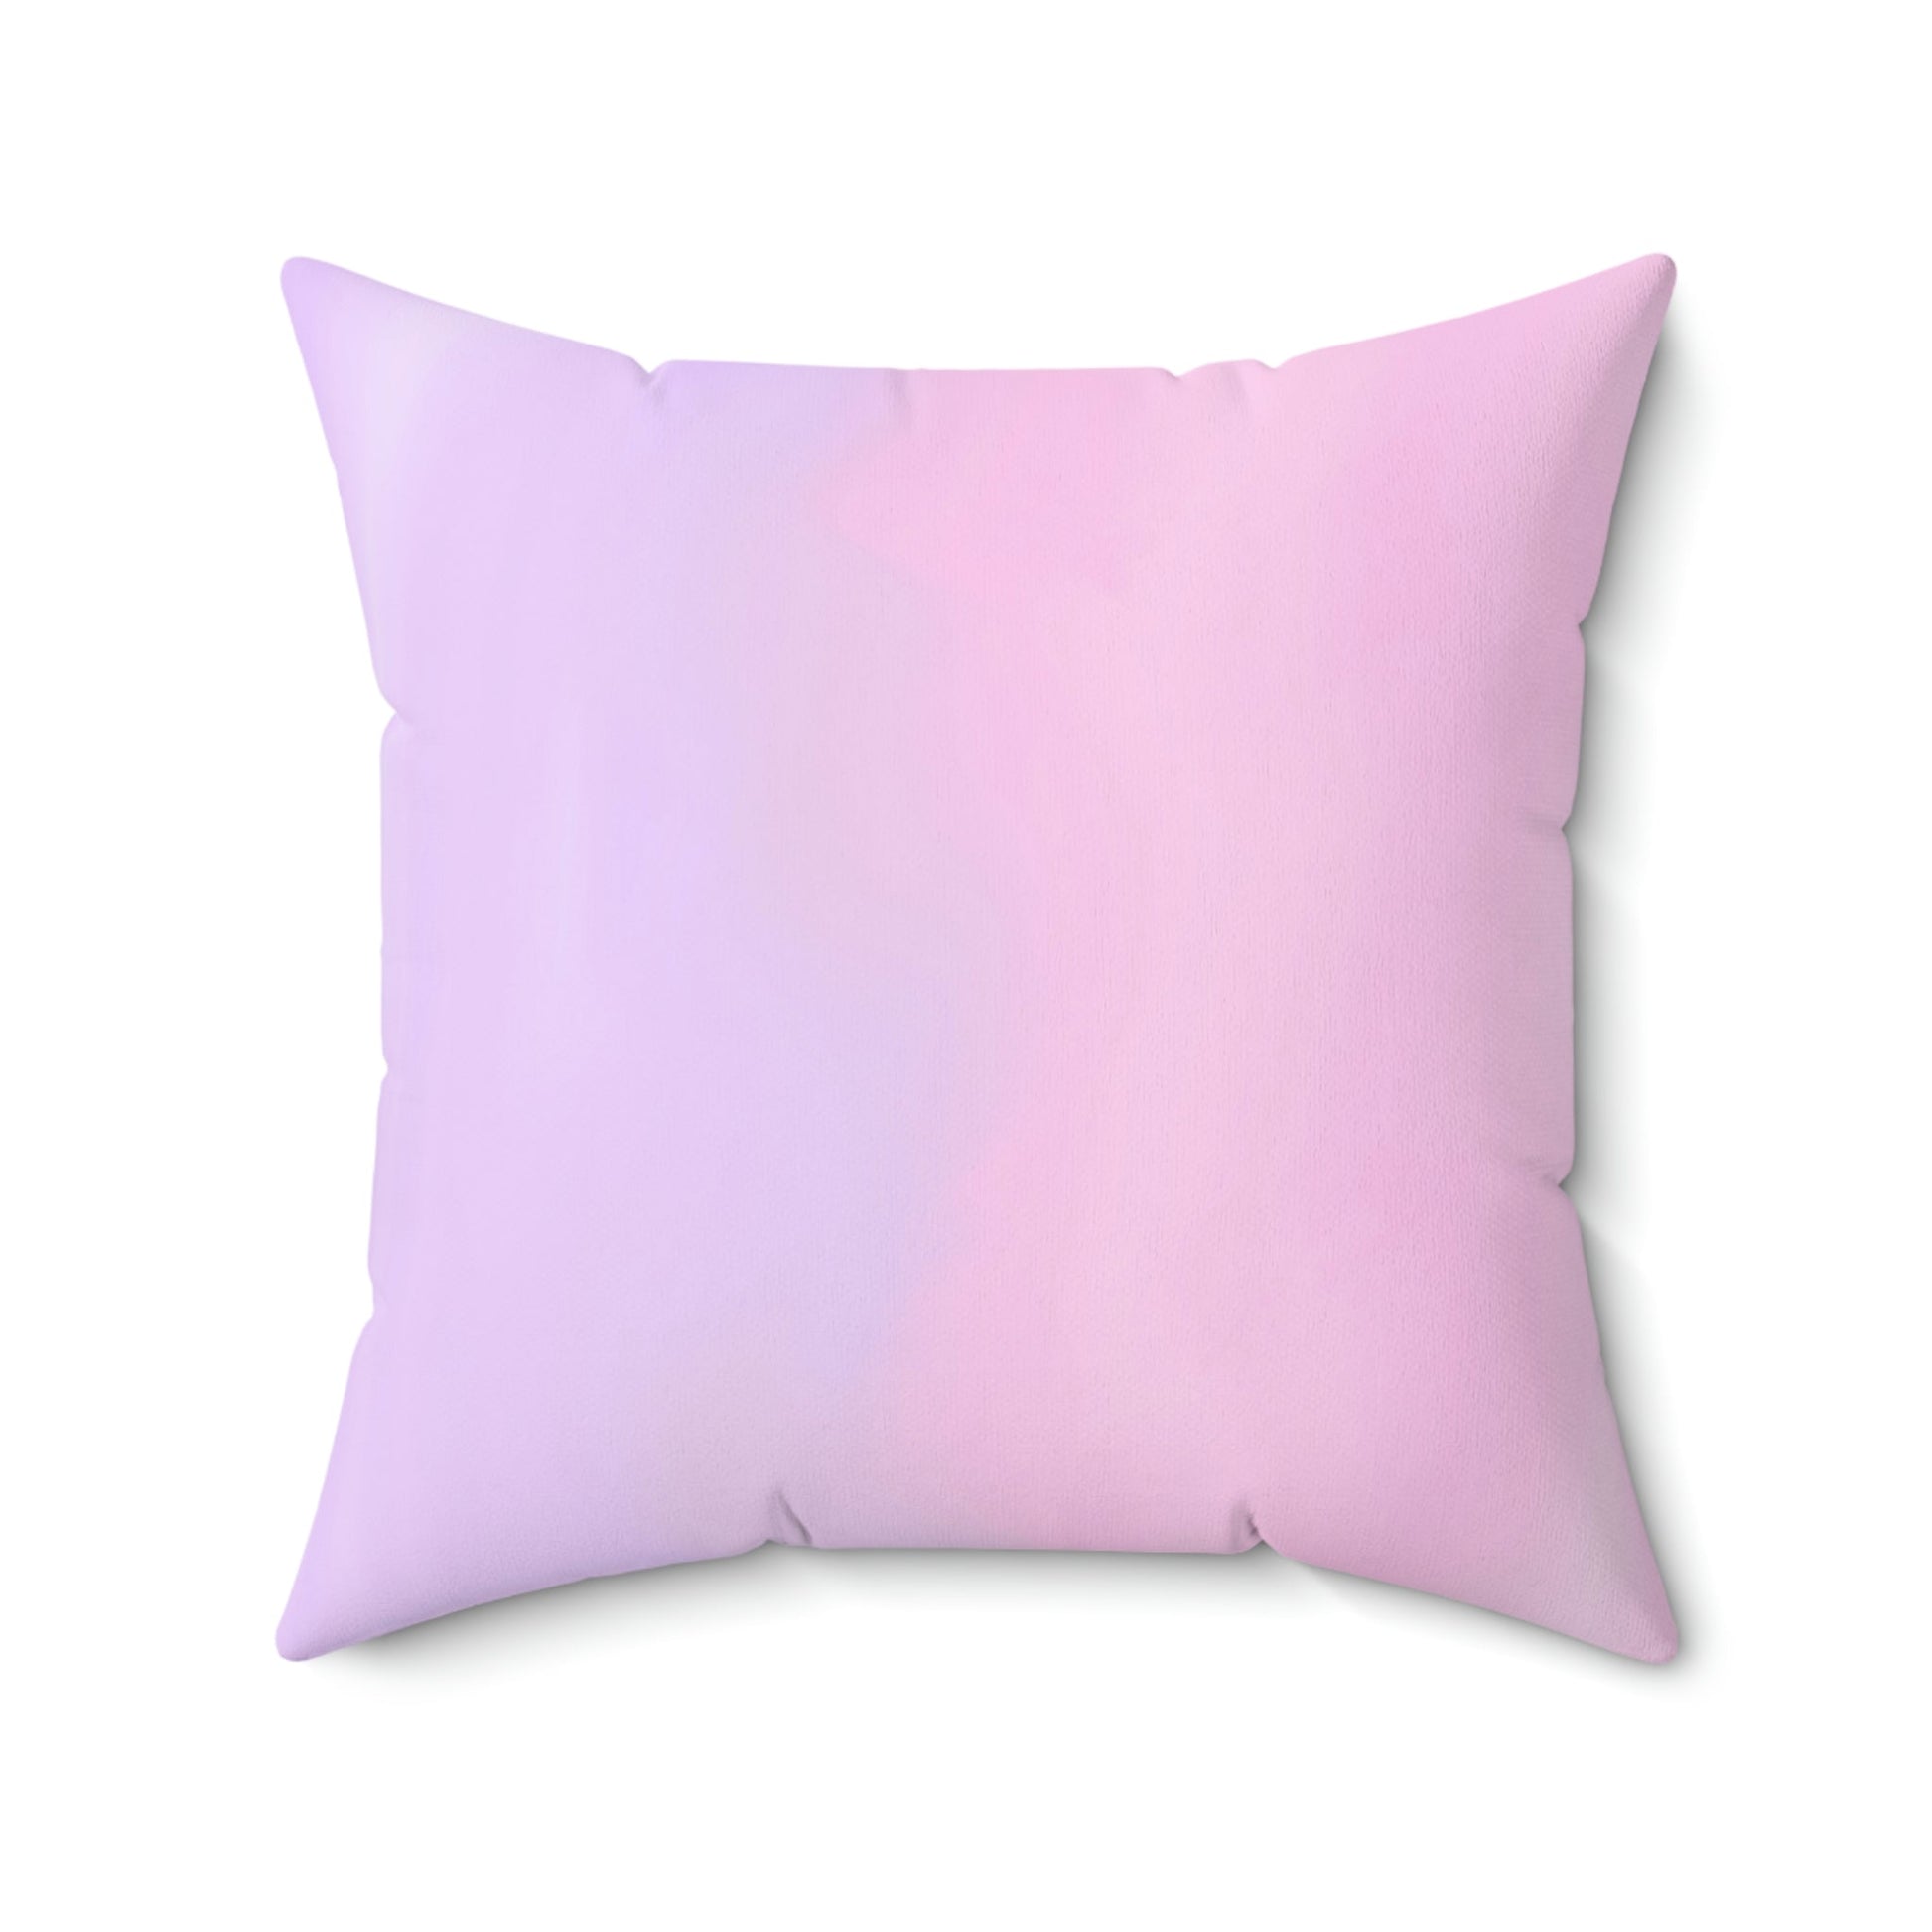 Watercolor Ombre Square Pillow Home Decor Pink Sweetheart